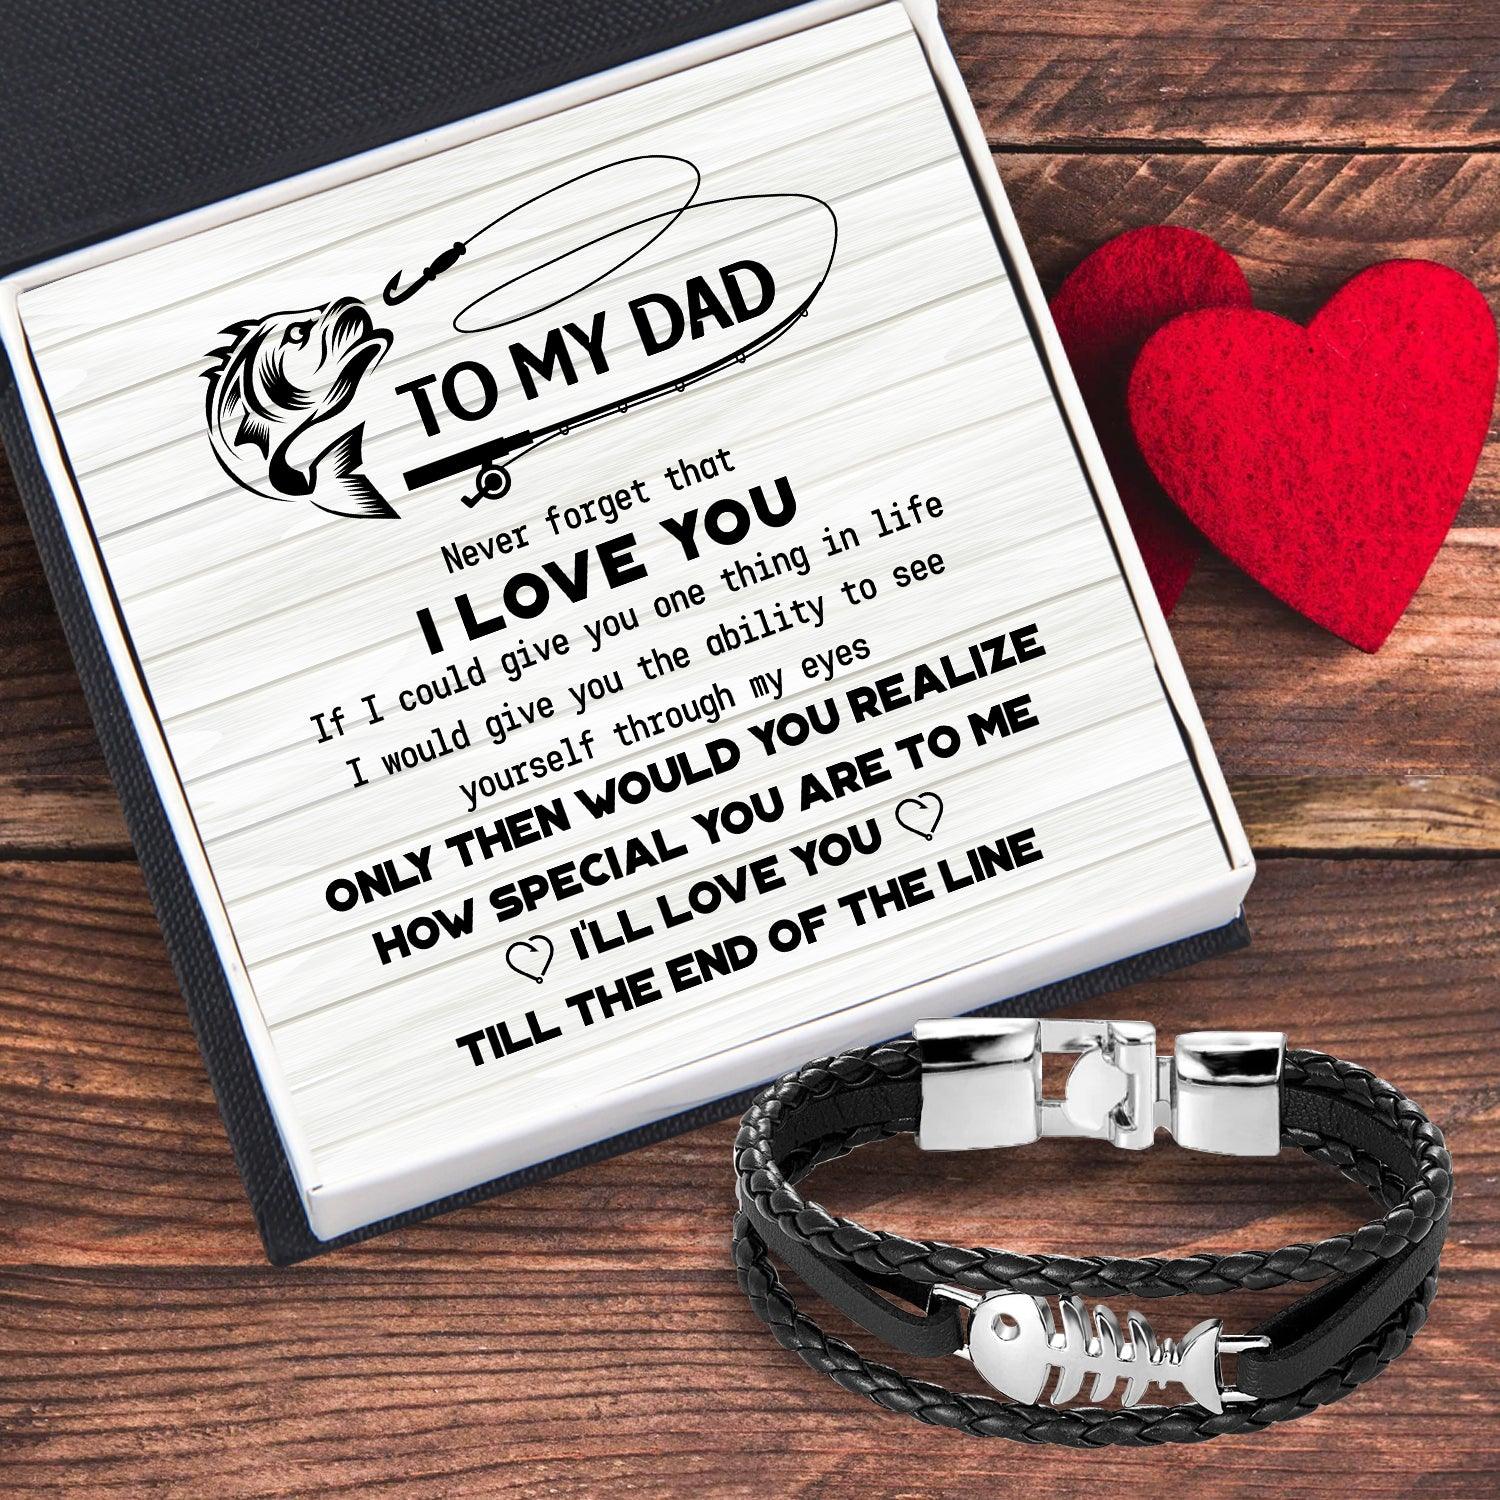 Fish Leather Bracelet - Fishing - To My Dad - How Special You Are To Me - Augbzp18001 - Gifts Holder